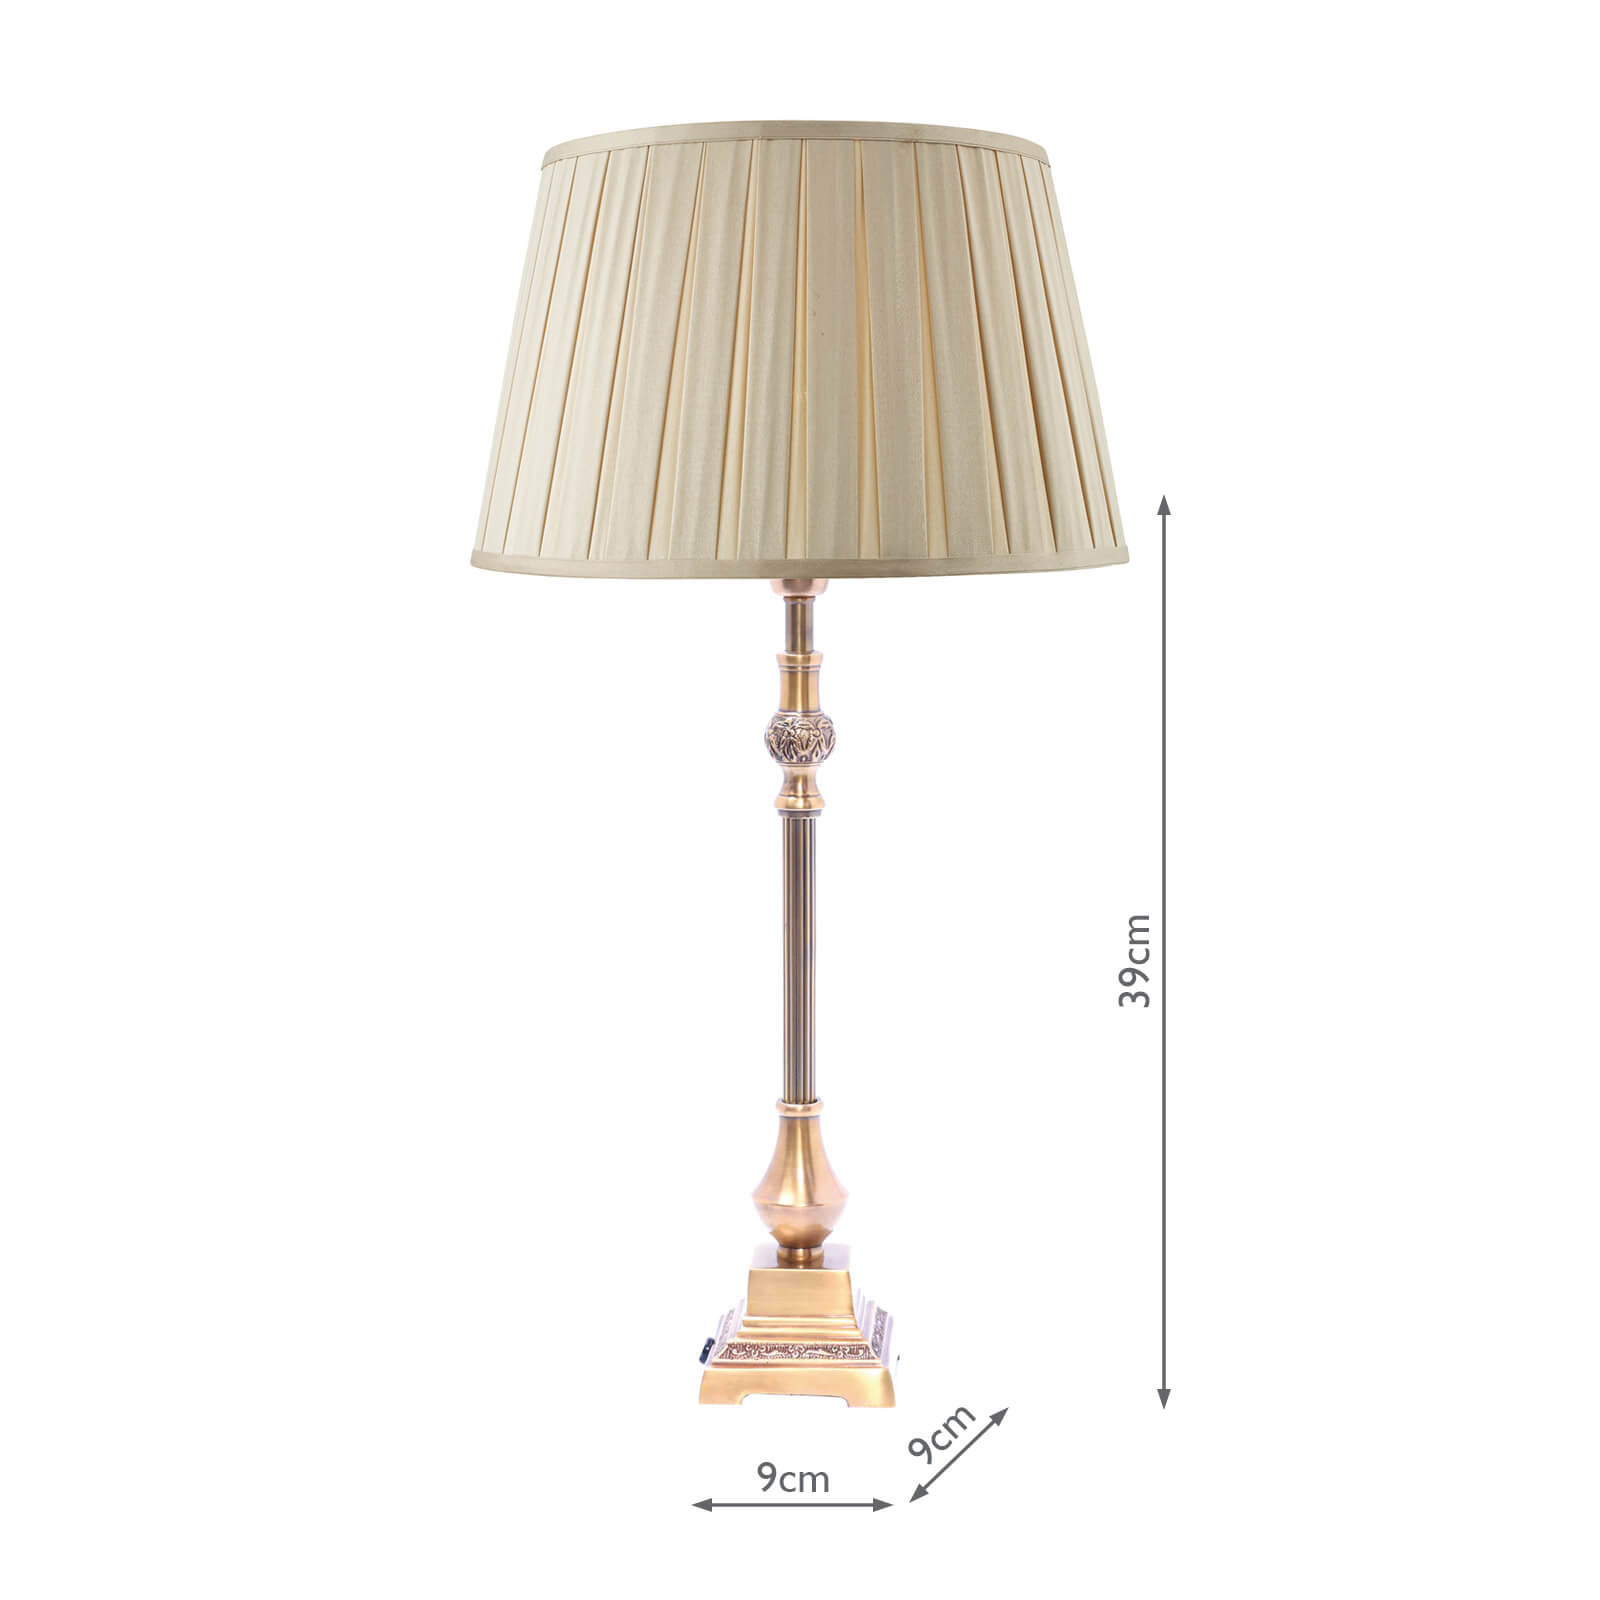 Haiden Table Lamp Antique Brass Base Only, Brass Lamp Table